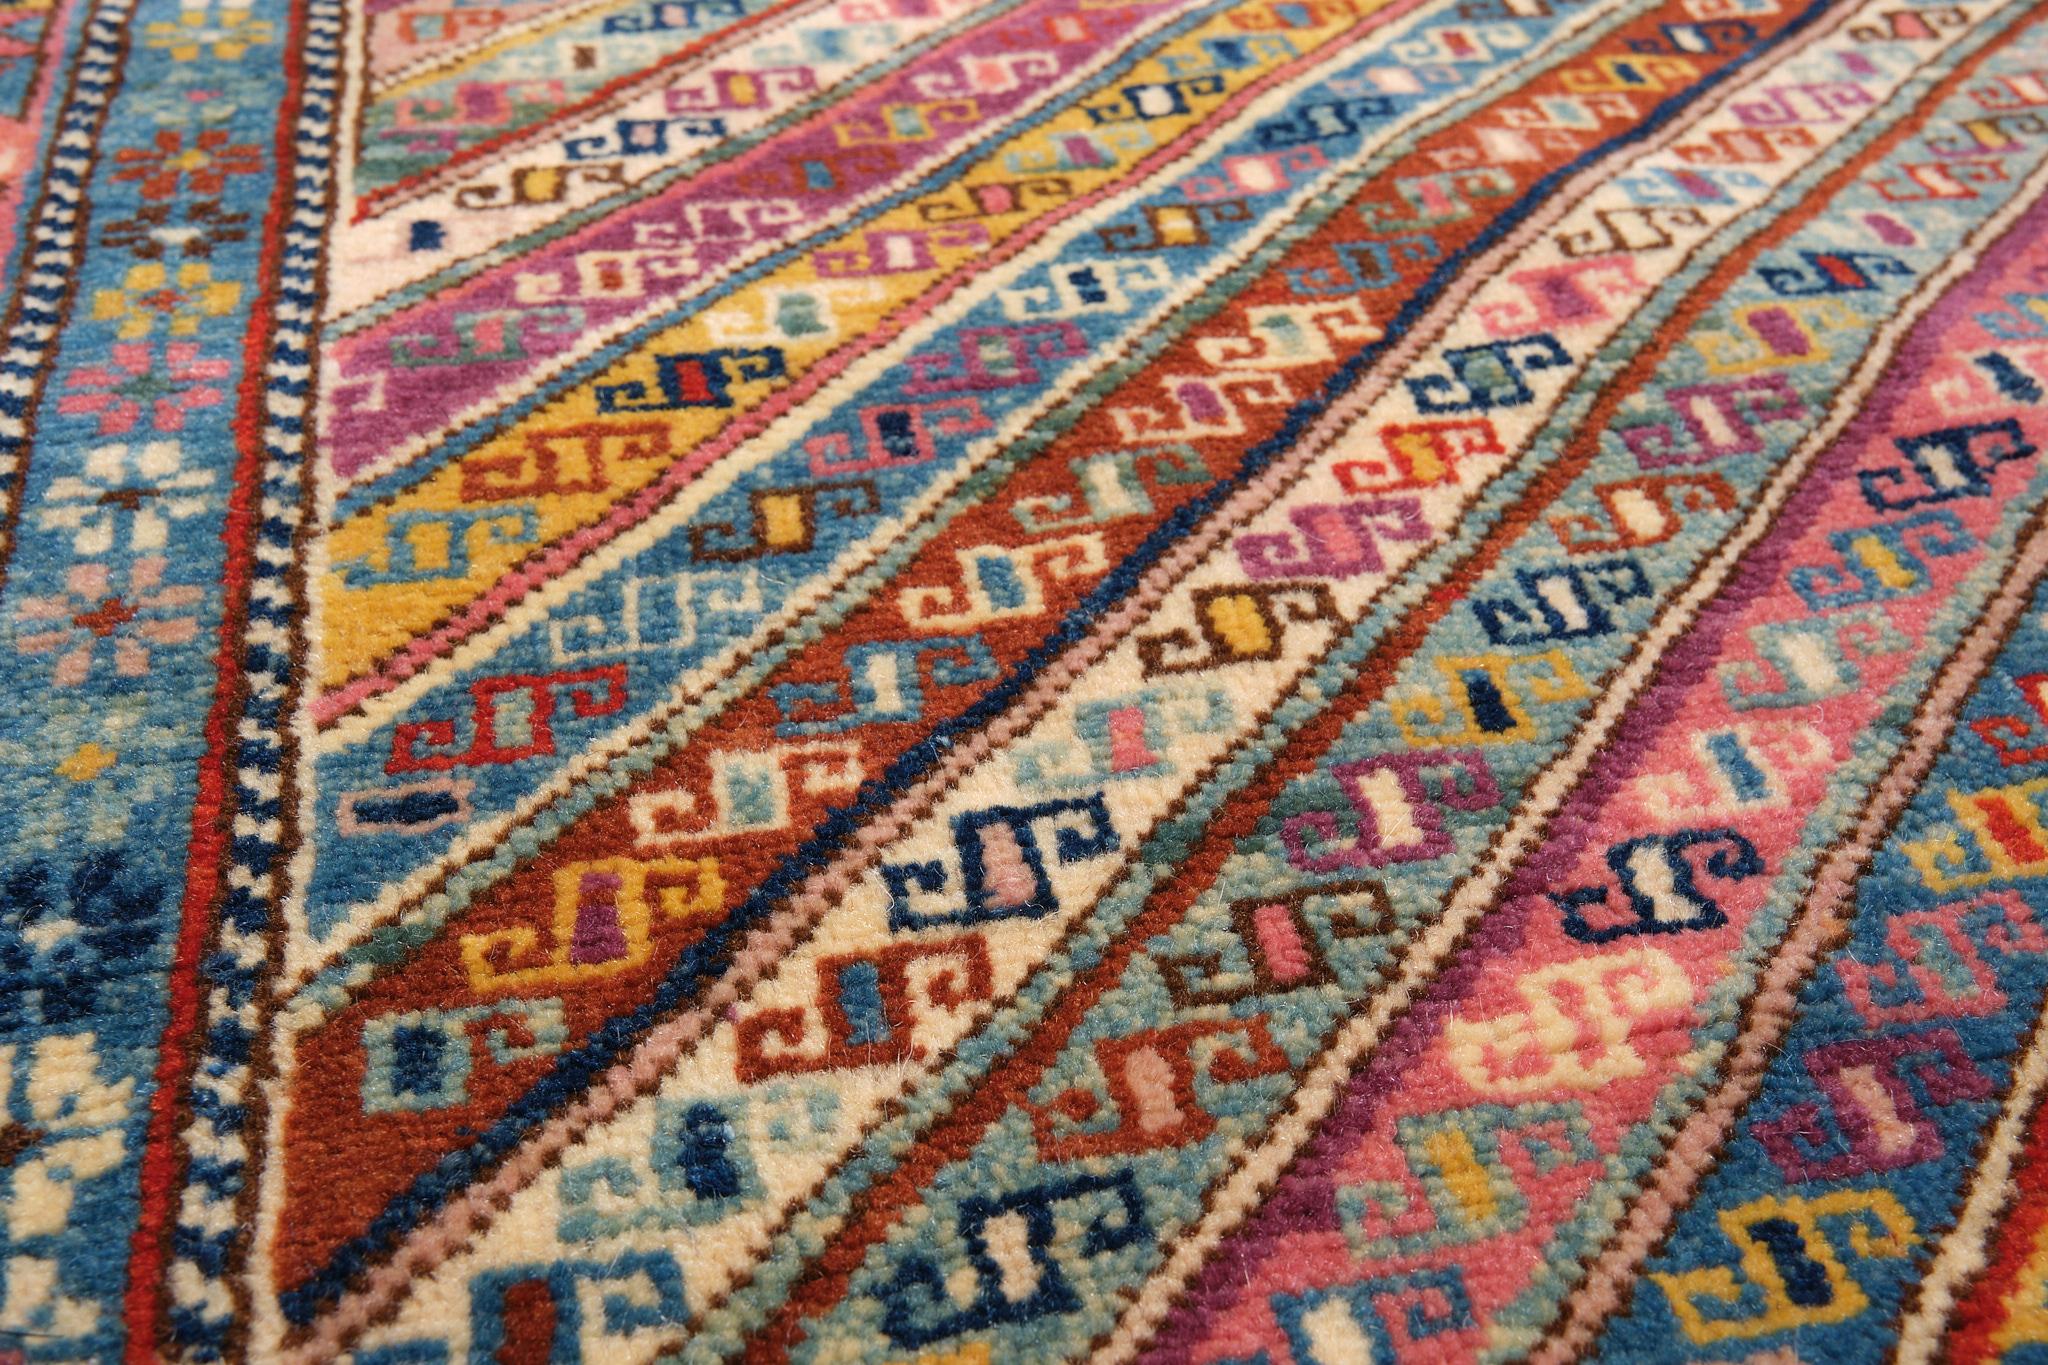 The source of the rug comes from the book Tapis du Caucase – Rugs of the Caucasus, Ian Bennett & Aziz Bassoul, The Nicholas Sursock Museum, Beirut, Lebanon 2003, nr.42 and Oriental Rugs Volume 1 Caucasian, Ian Bennett, Oriental Textile Press,